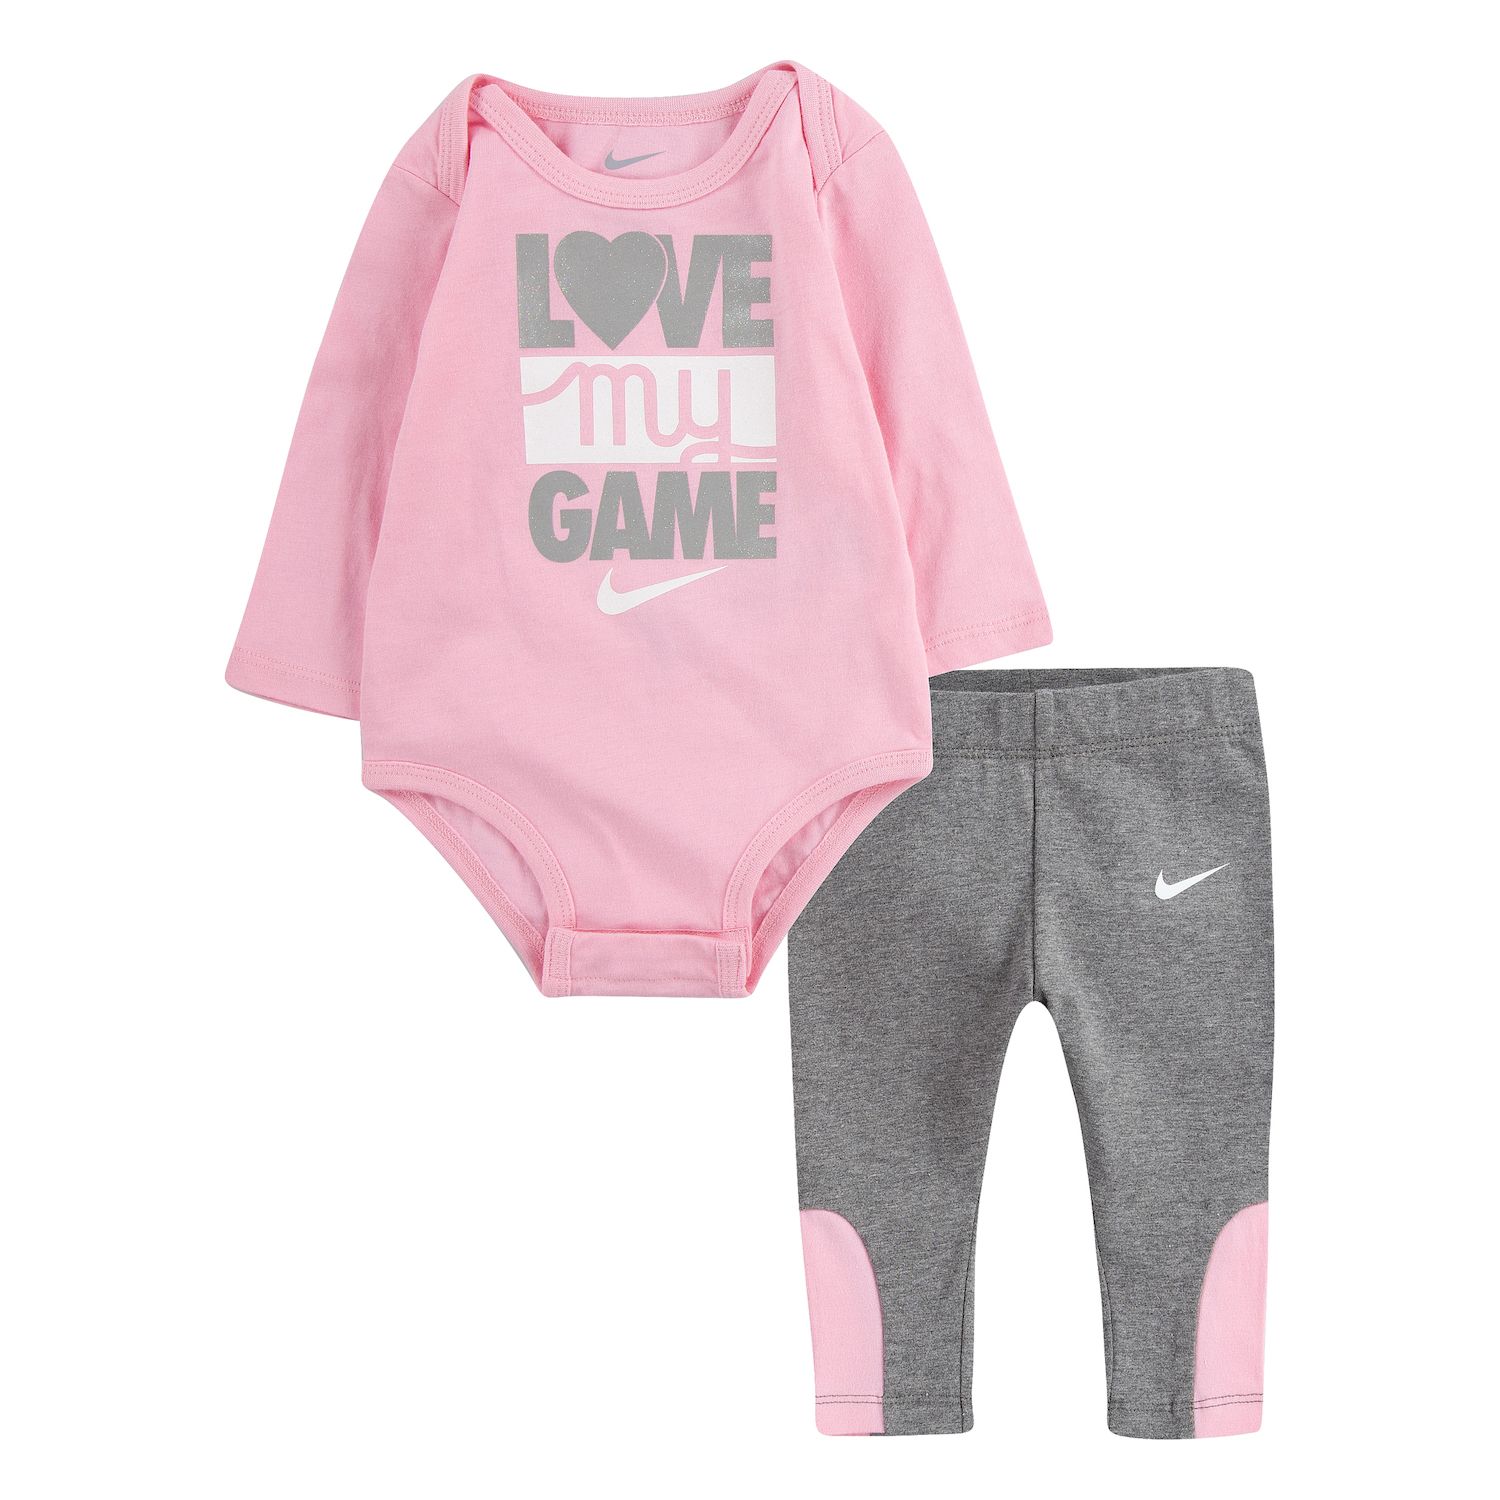 18 month old nike outfits